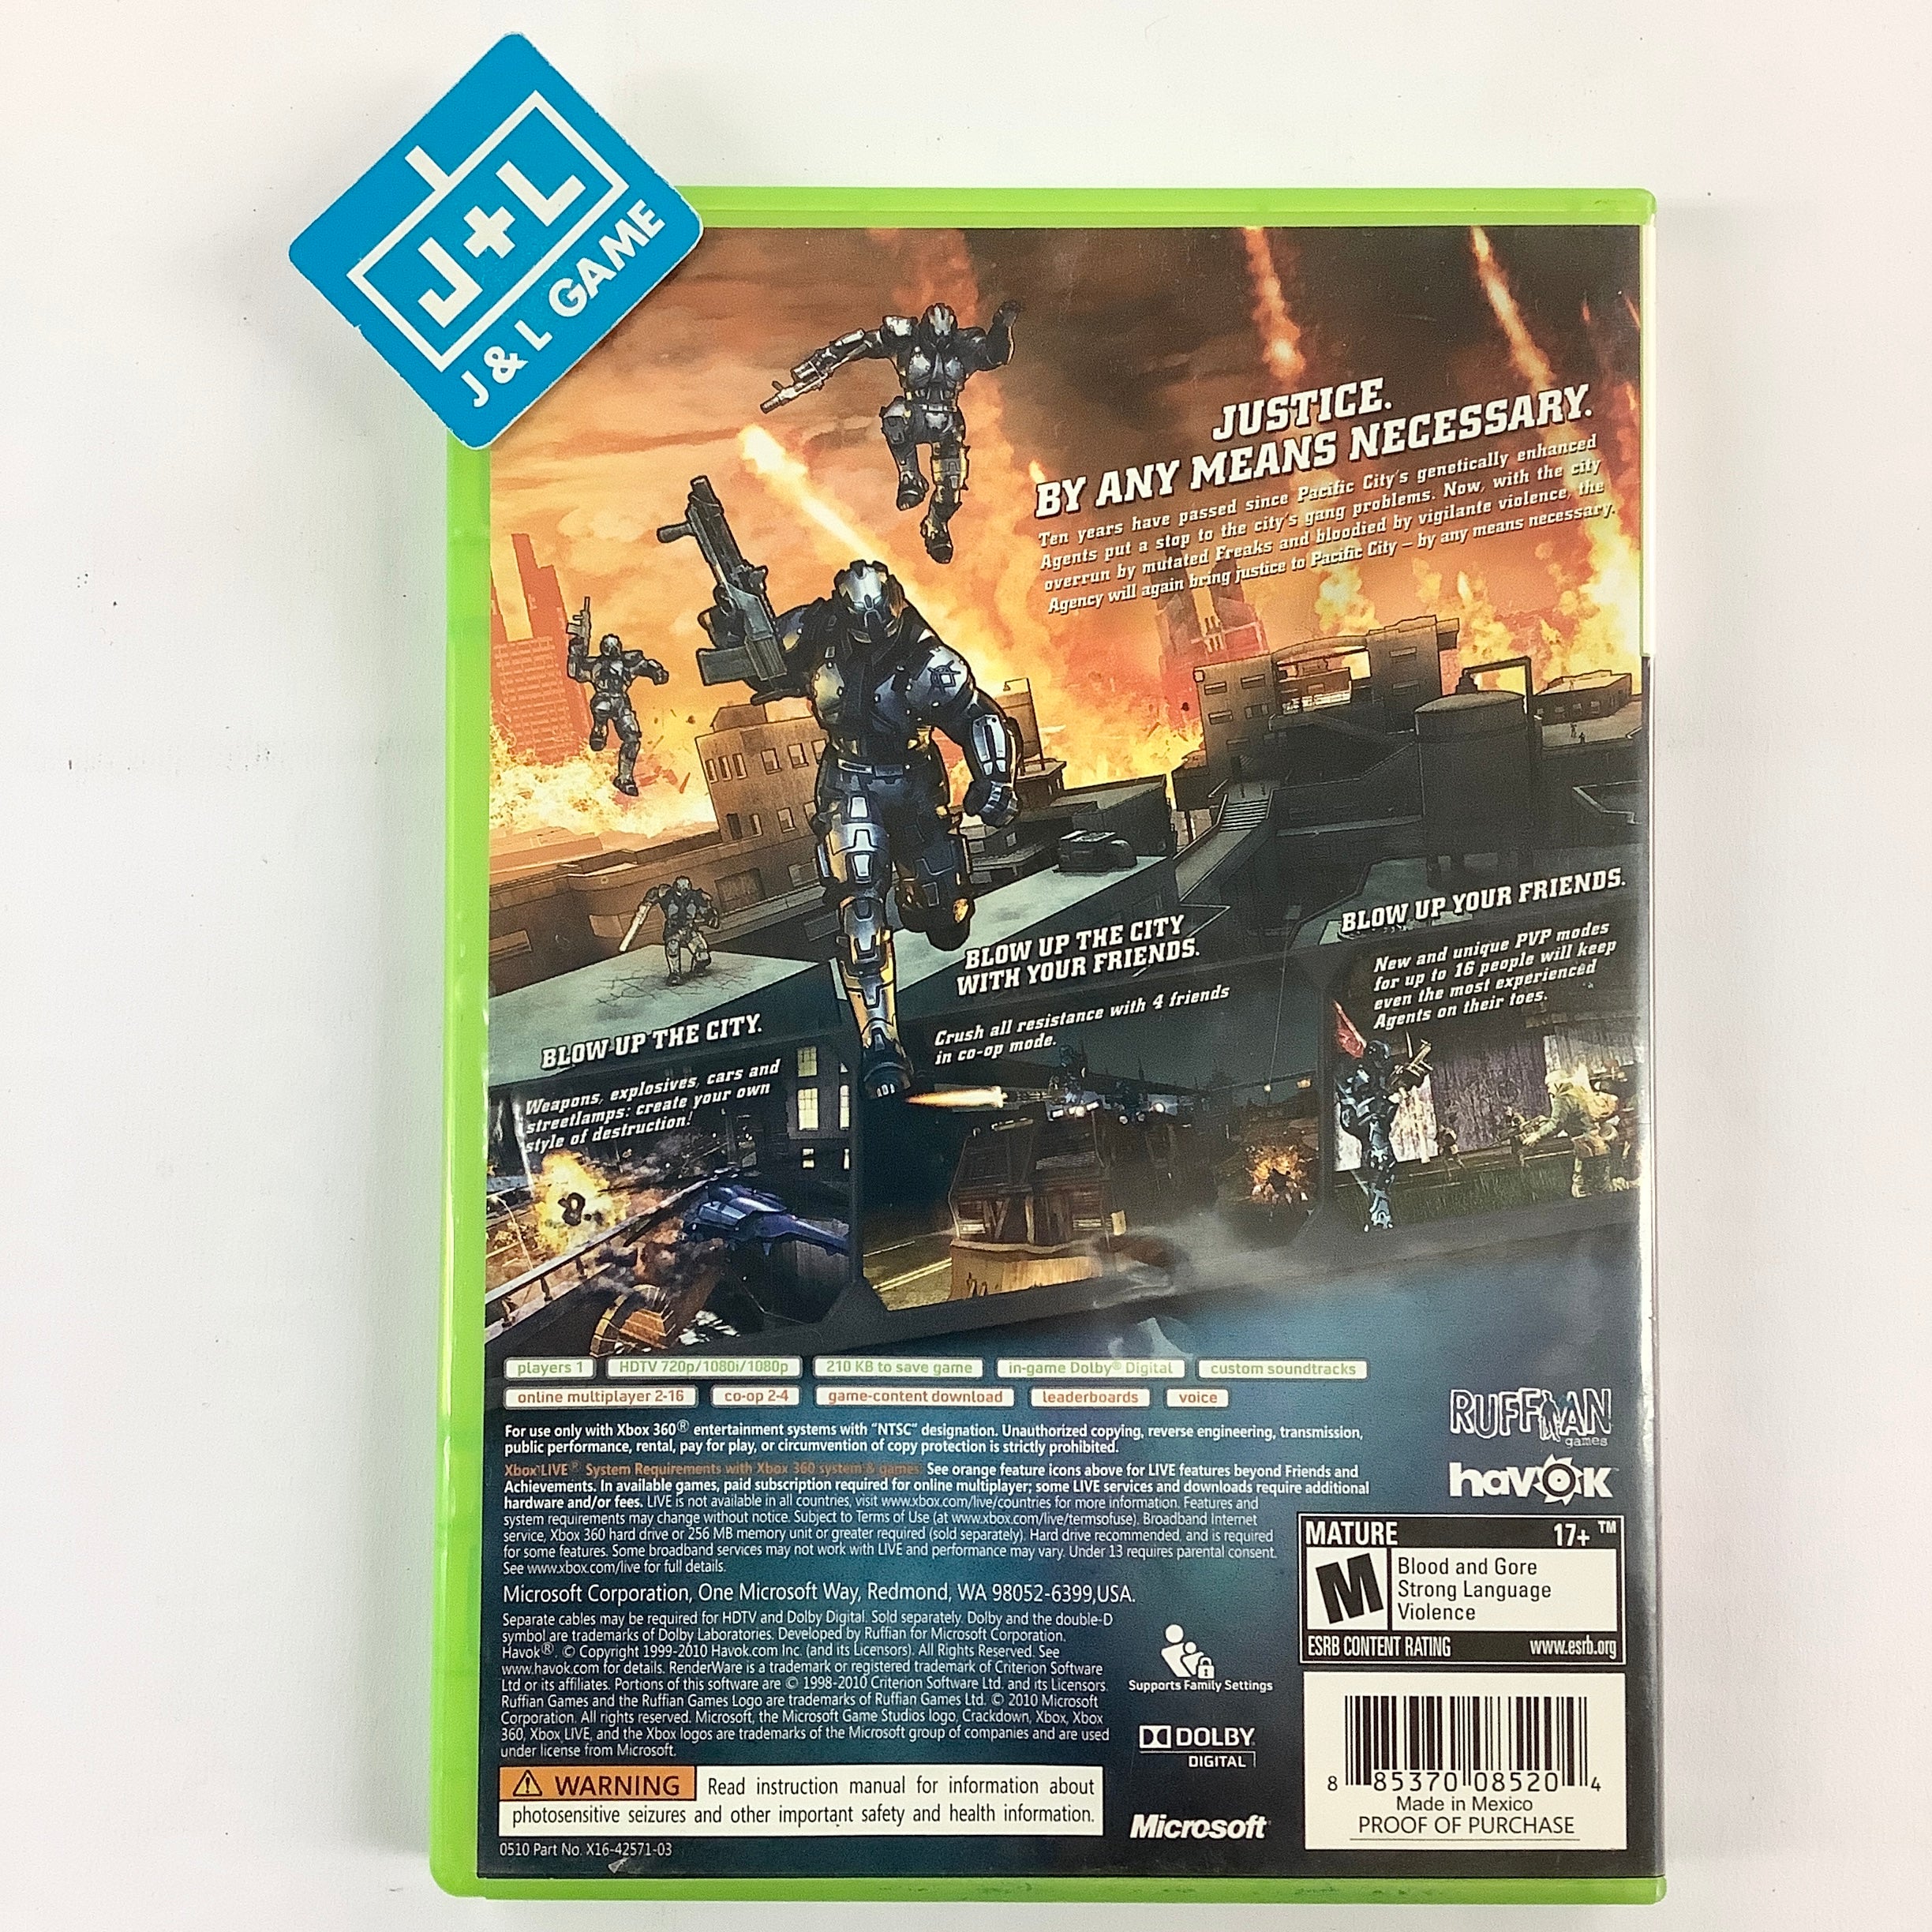 Crackdown 2 - Xbox 360 [Pre-Owned] Video Games Microsoft Game Studios   